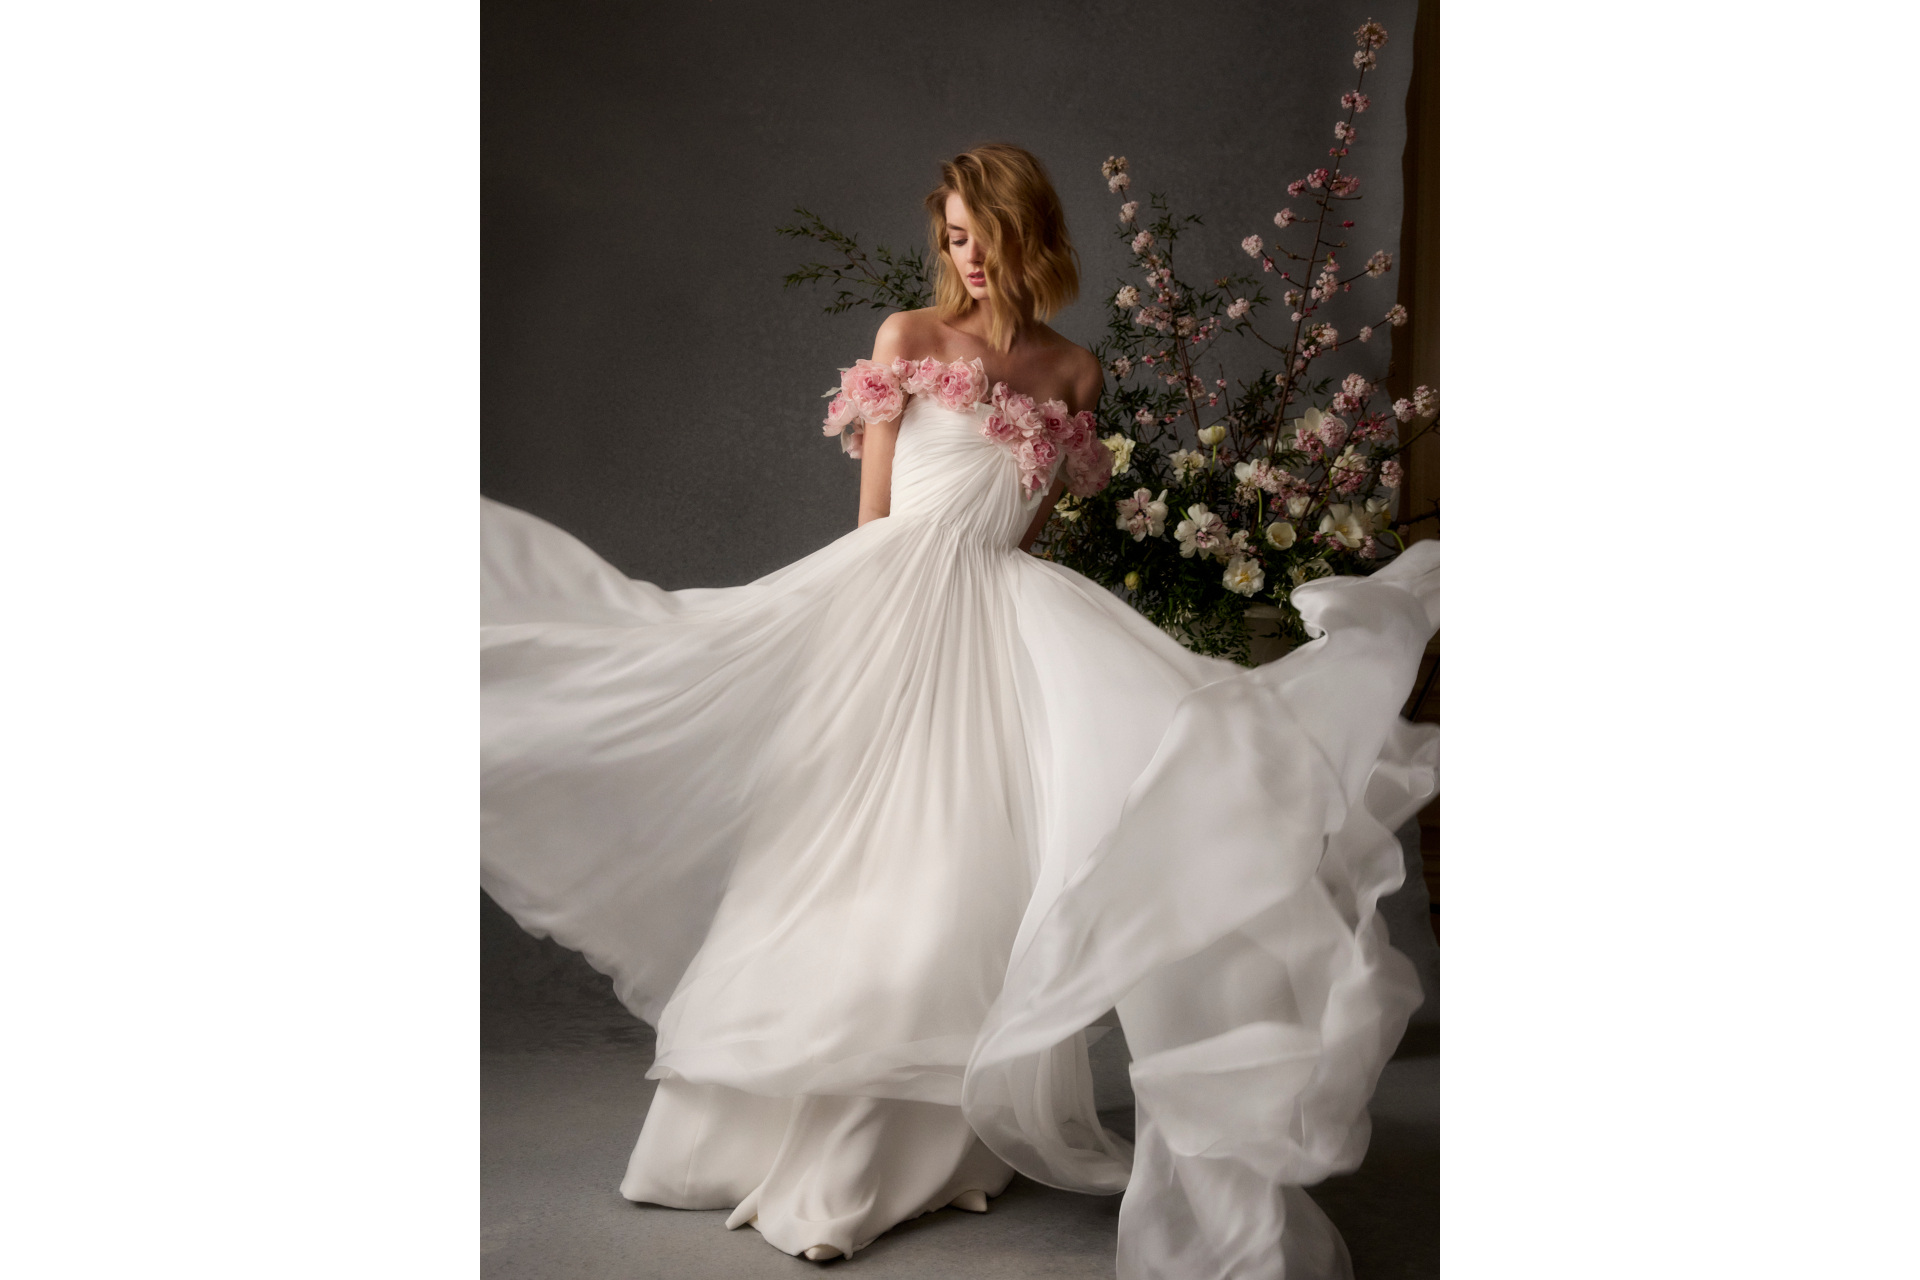 Woman in wedding dress with flowers